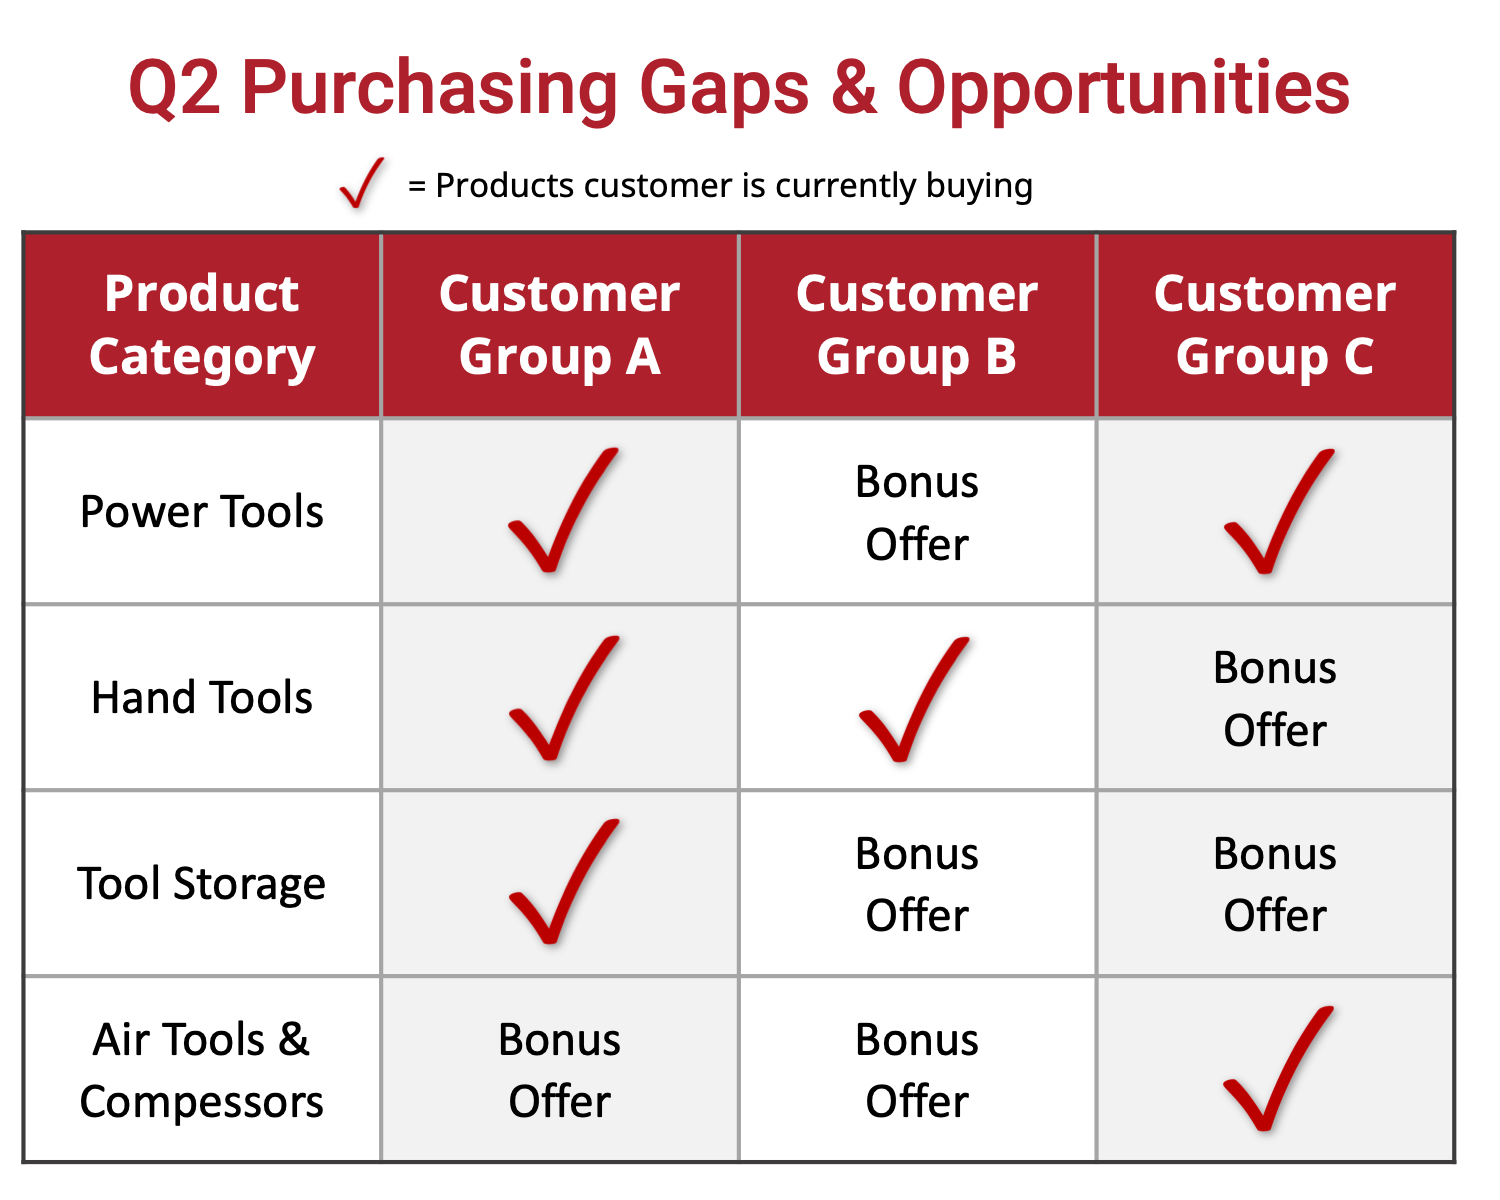 A table showing q2 purchasing gaps and opportunities